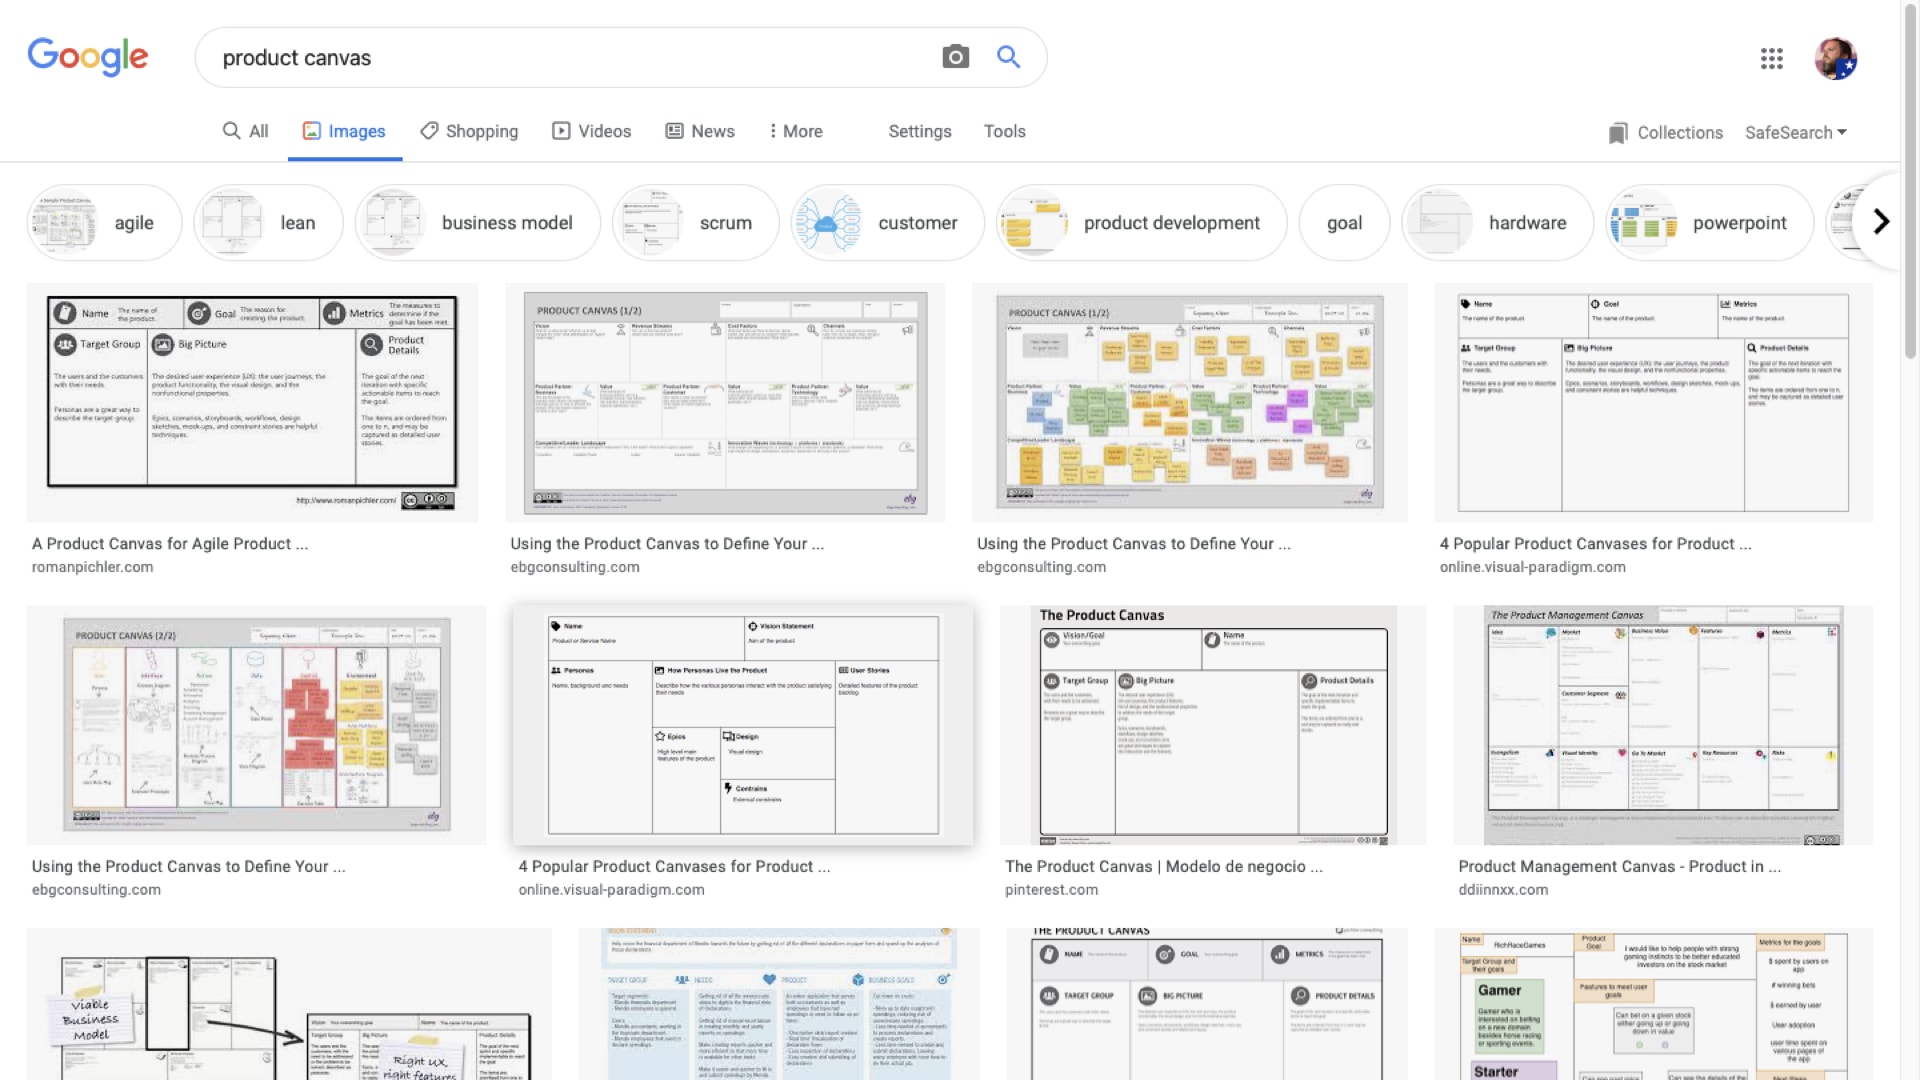 A screen shot of a google image search for 'product canvas' with lots of results.